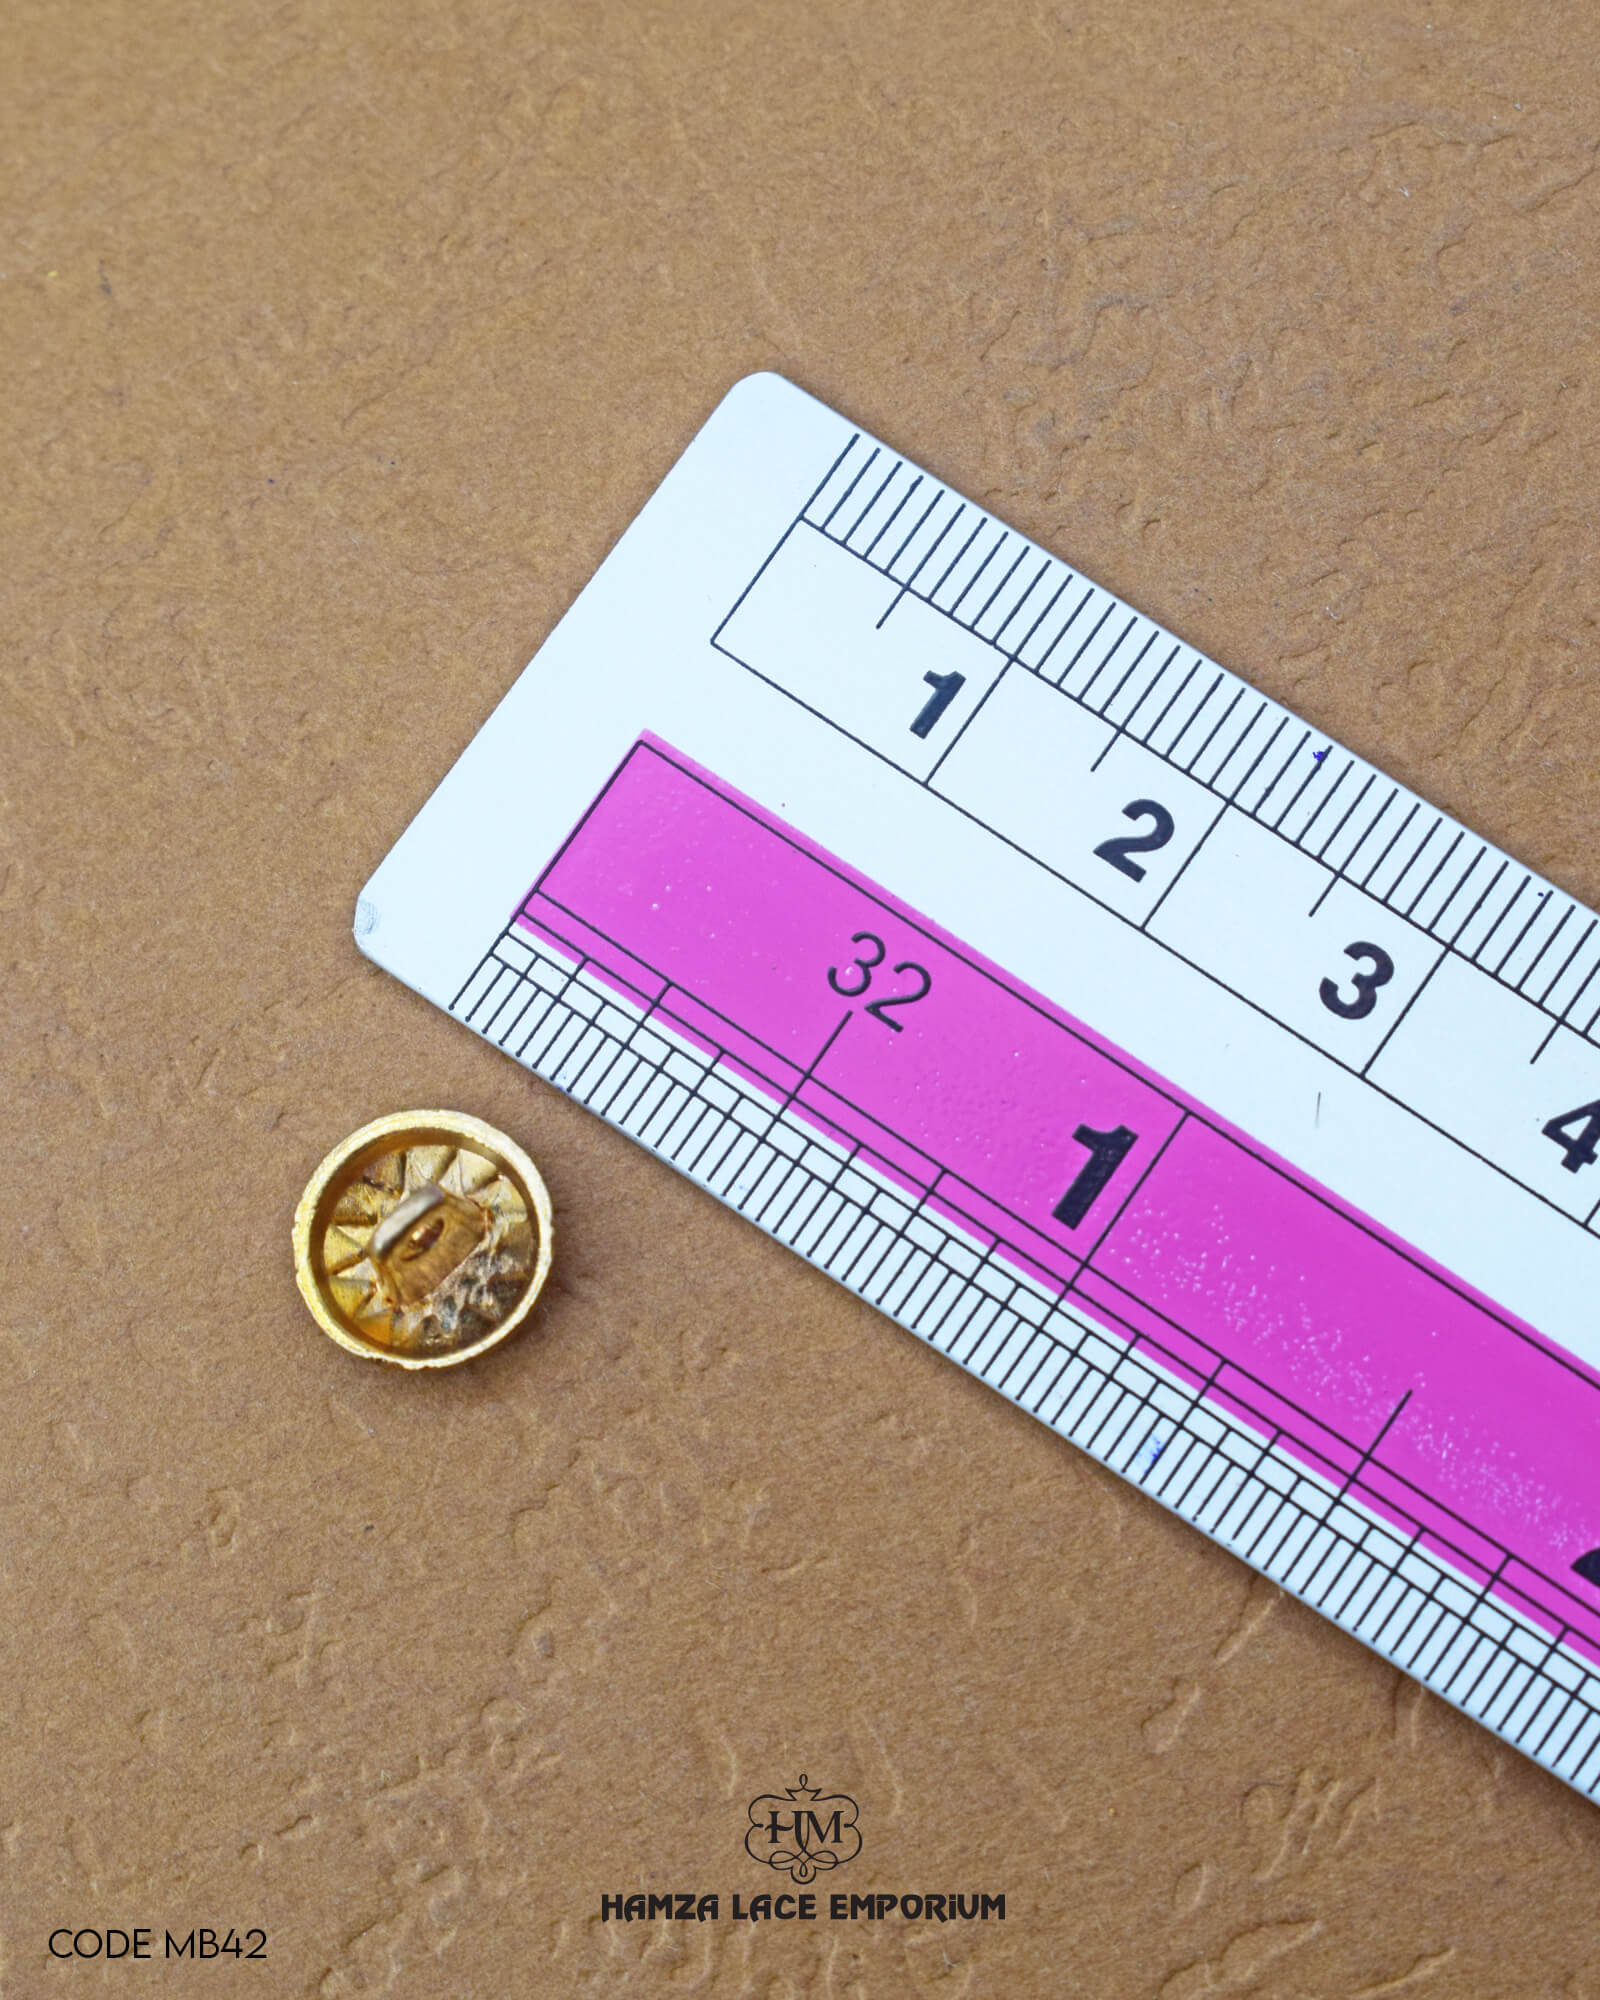 The size of the 'Metal Suiting Button MB42' is measured by using a ruler